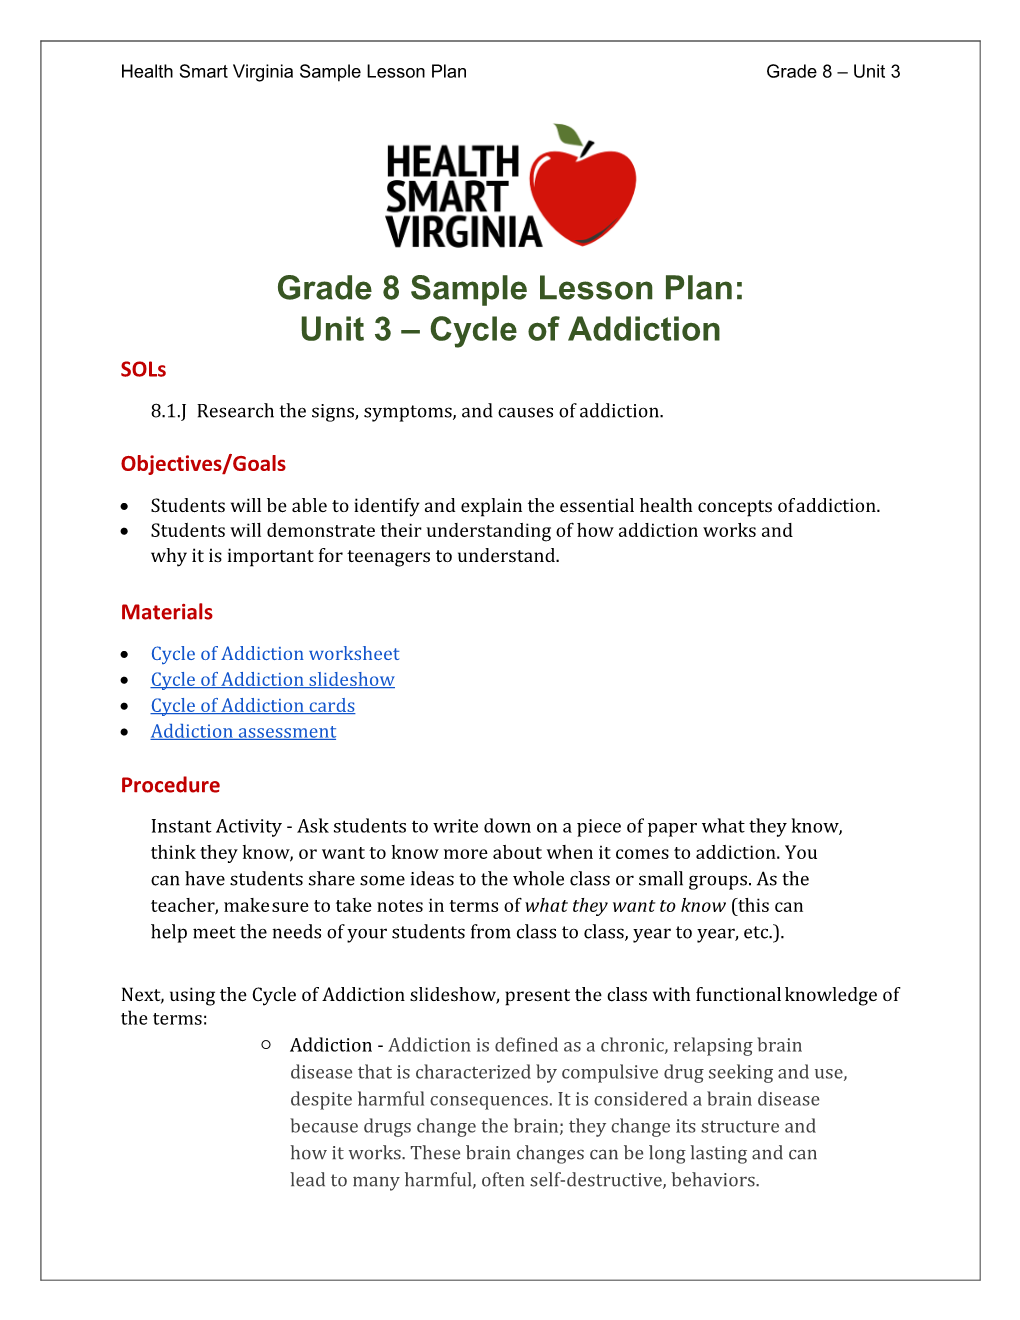 Cycle of Addiction Sols 8.1.J Research the Signs, Symptoms, and Causes of Addiction